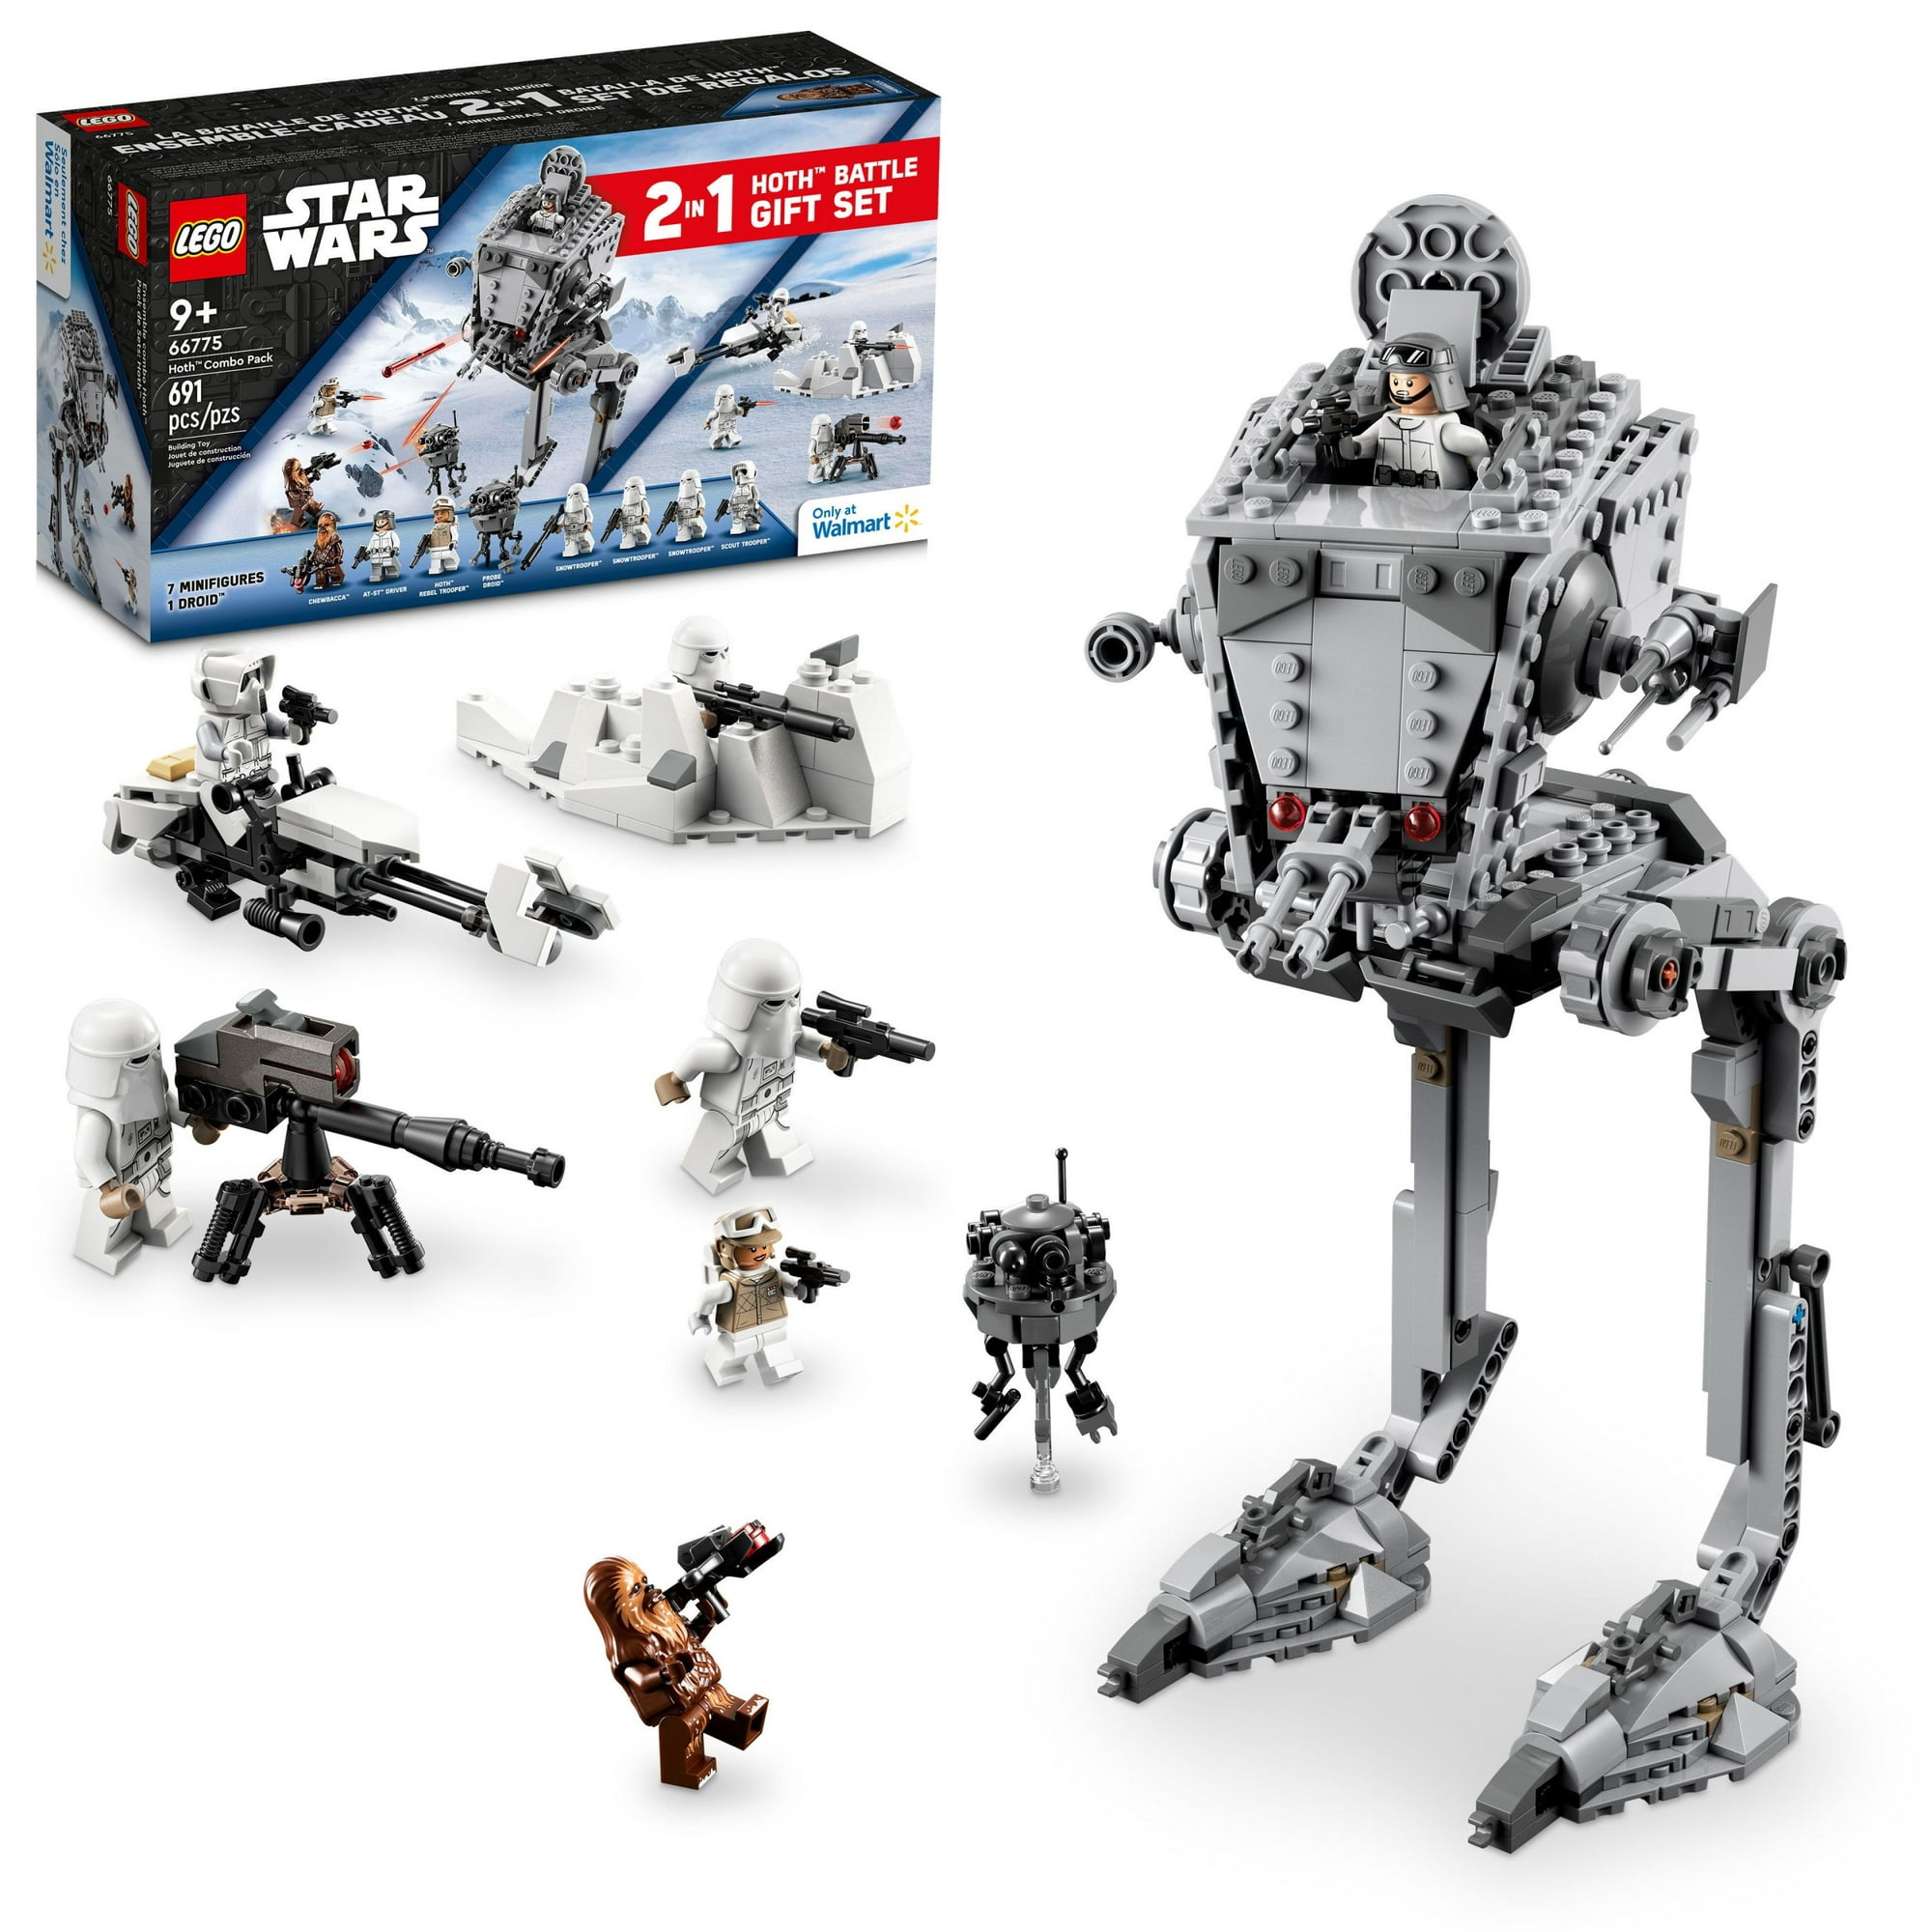 691-Piece LEGO Star Wars Hoth 2-in-1 Combo Pack (66775) $45 + Free Shipping